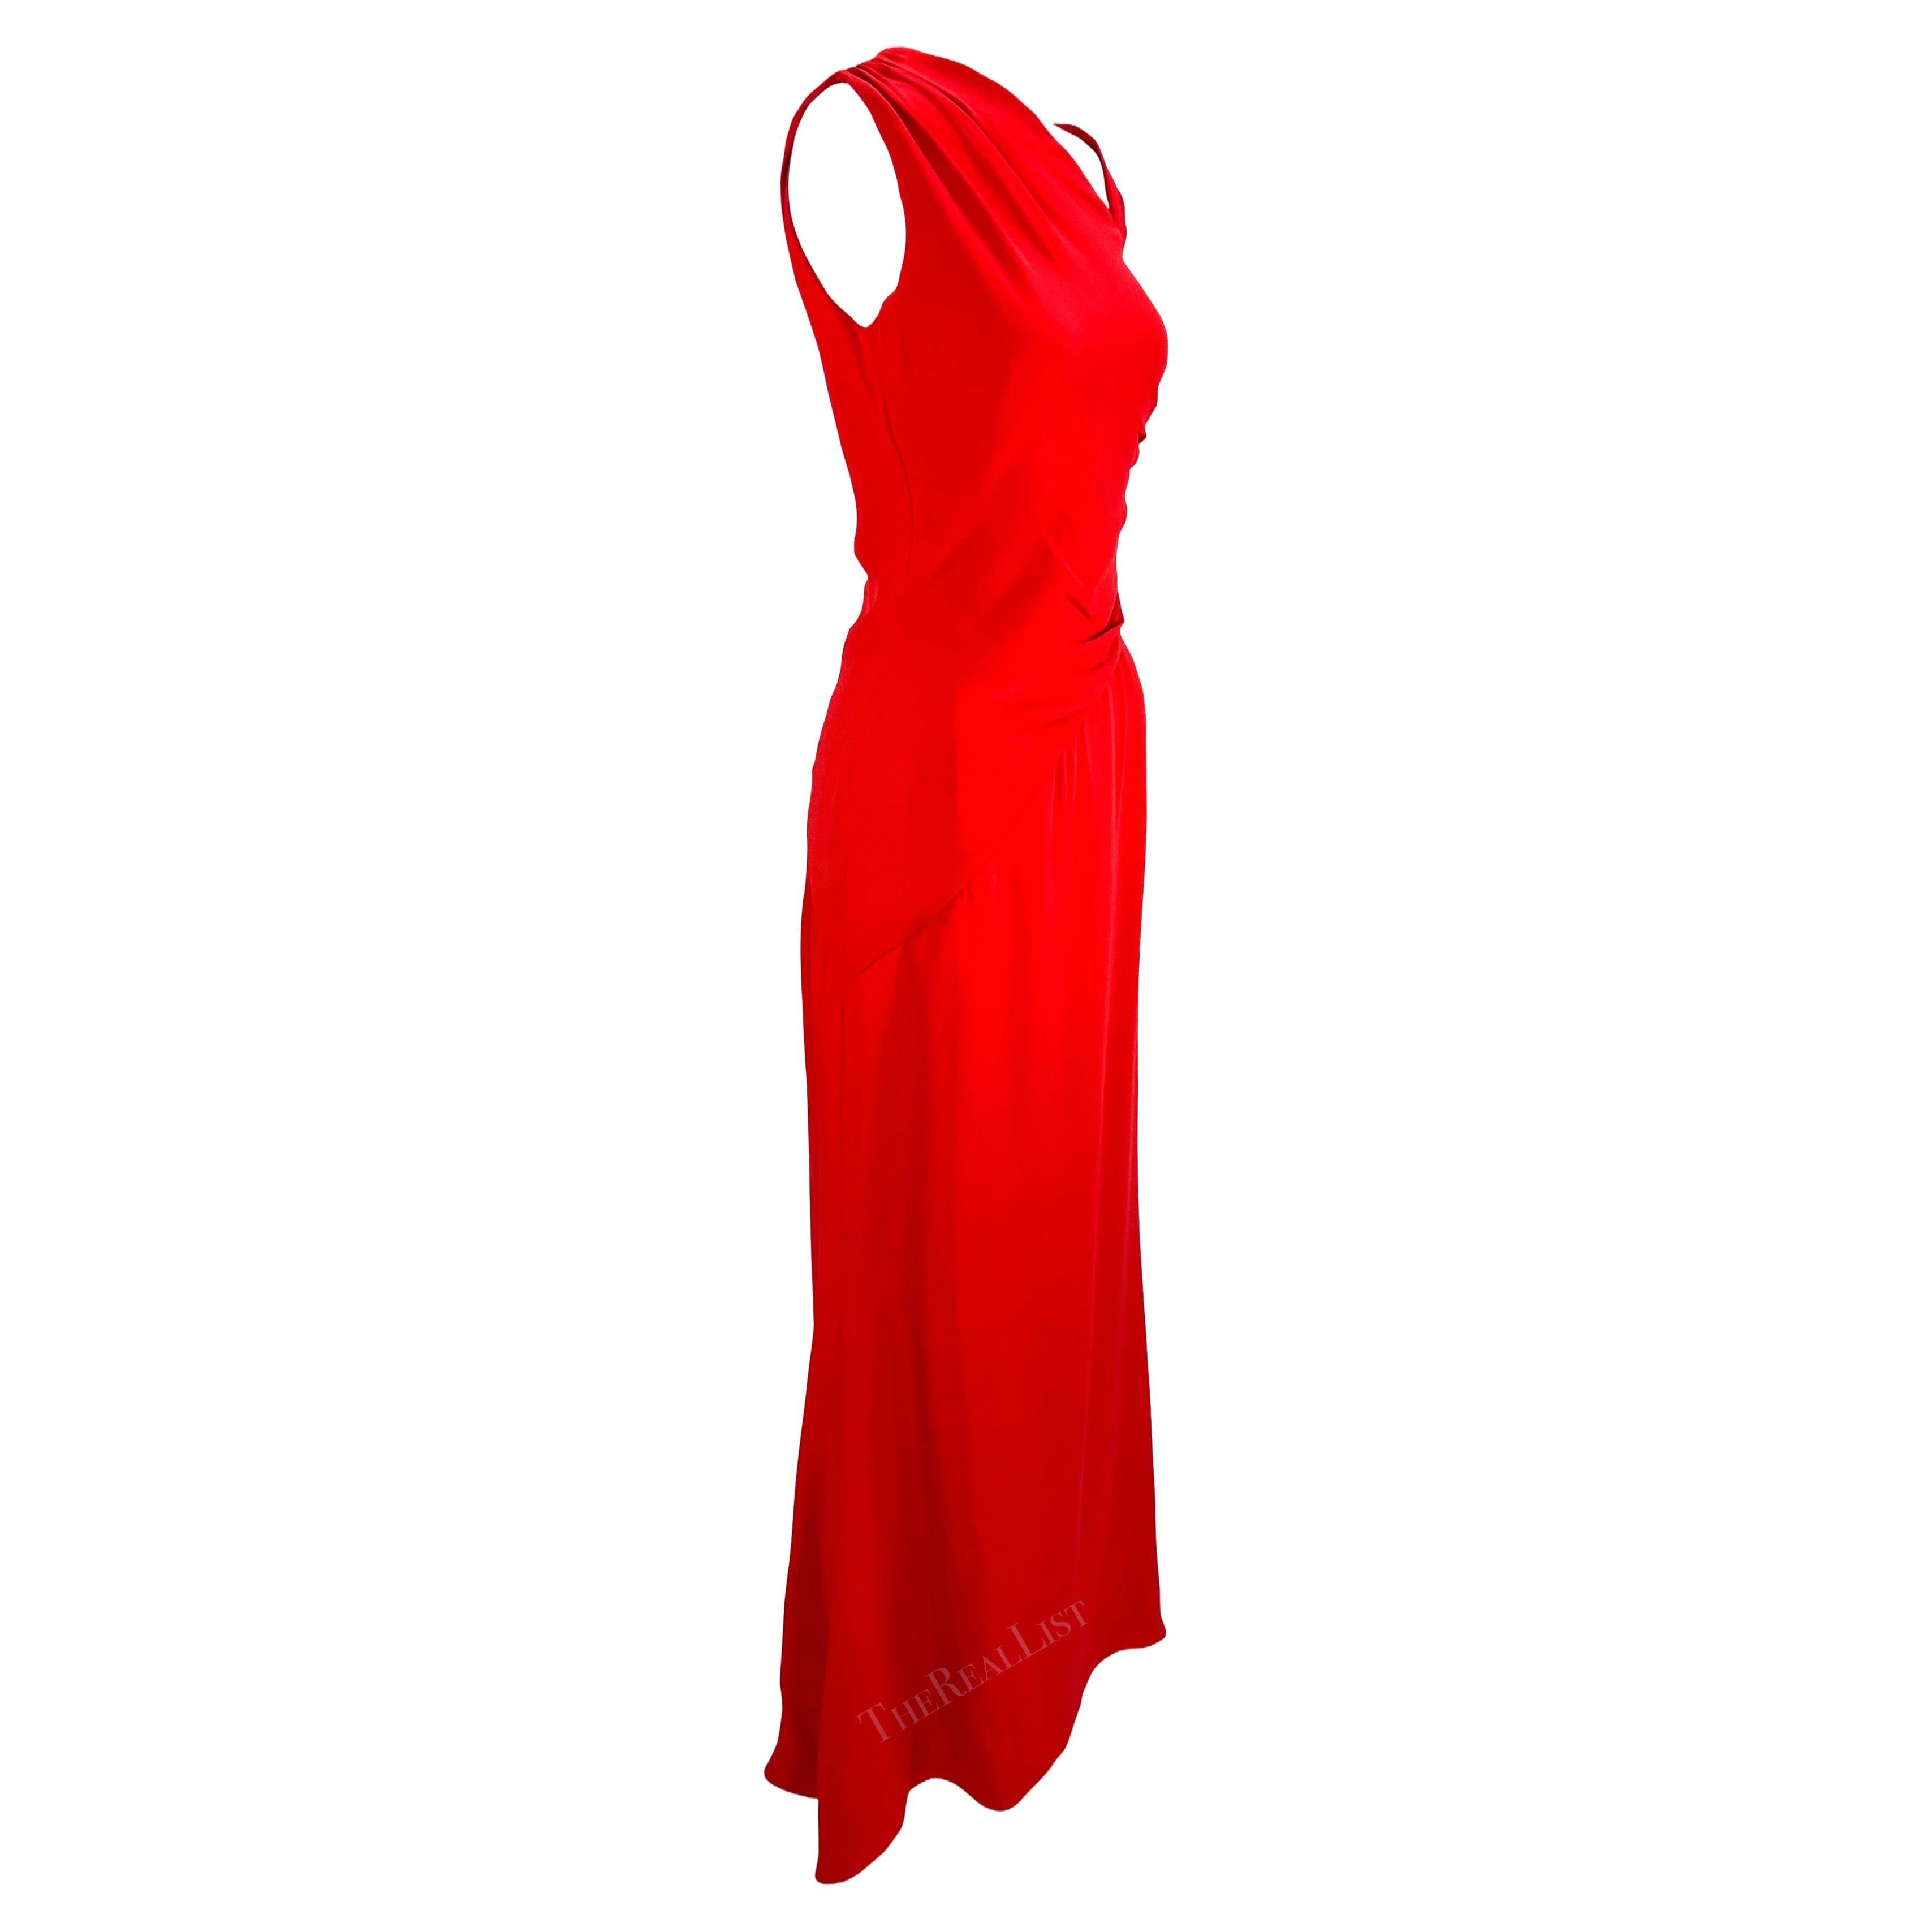 2000s Valentino Garavani Asymmetric Sleeveless Red Silk Gown In Excellent Condition For Sale In West Hollywood, CA